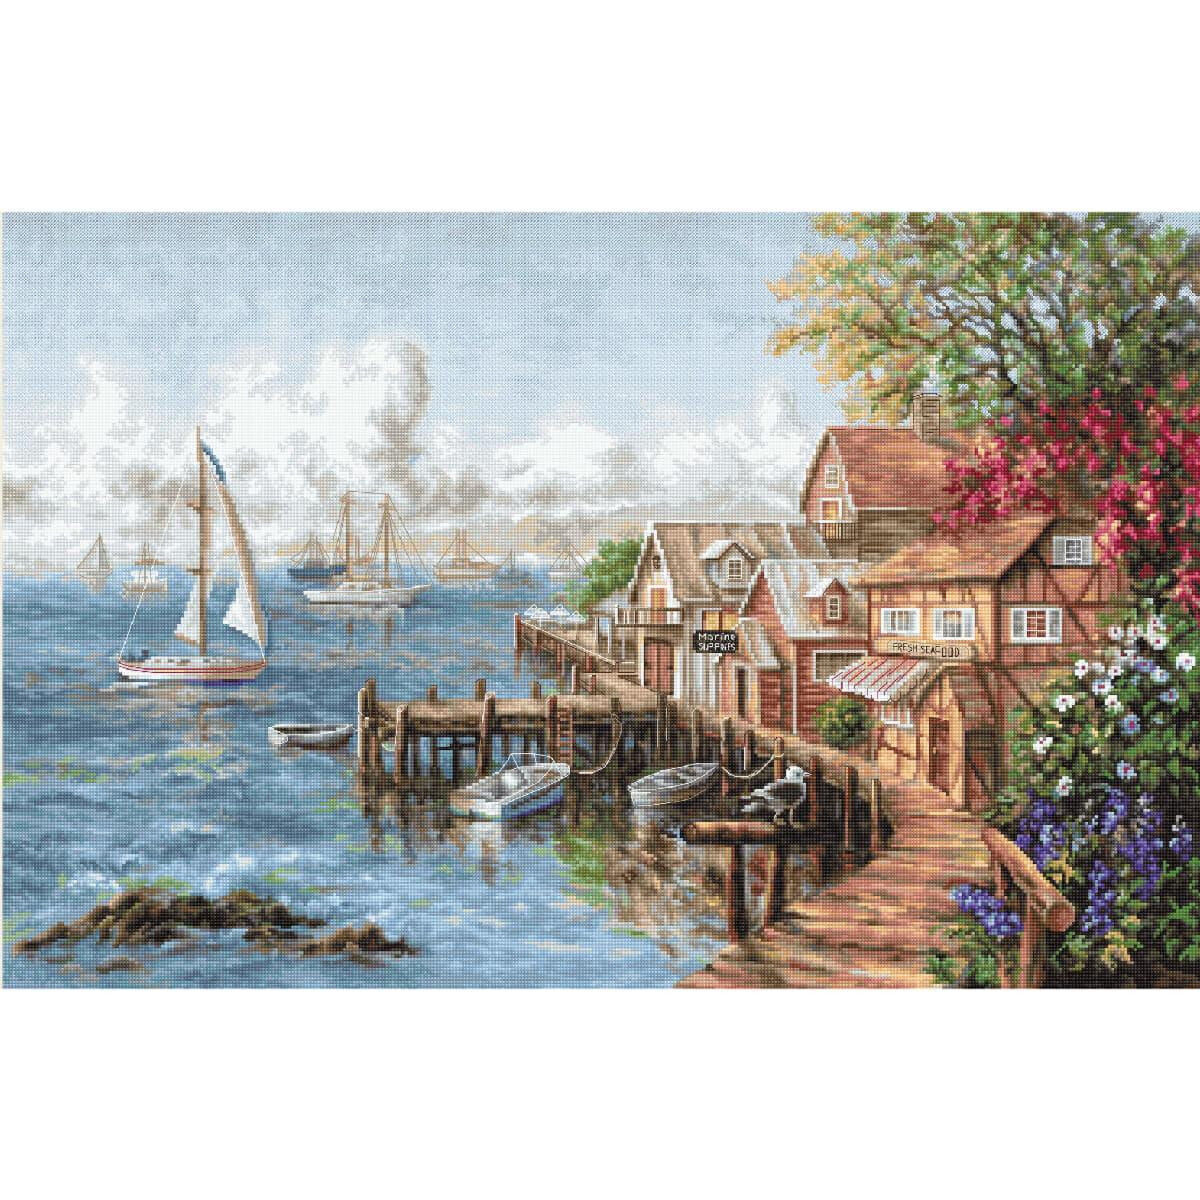 A picturesque harbor scene with sailboats on calm, blue...